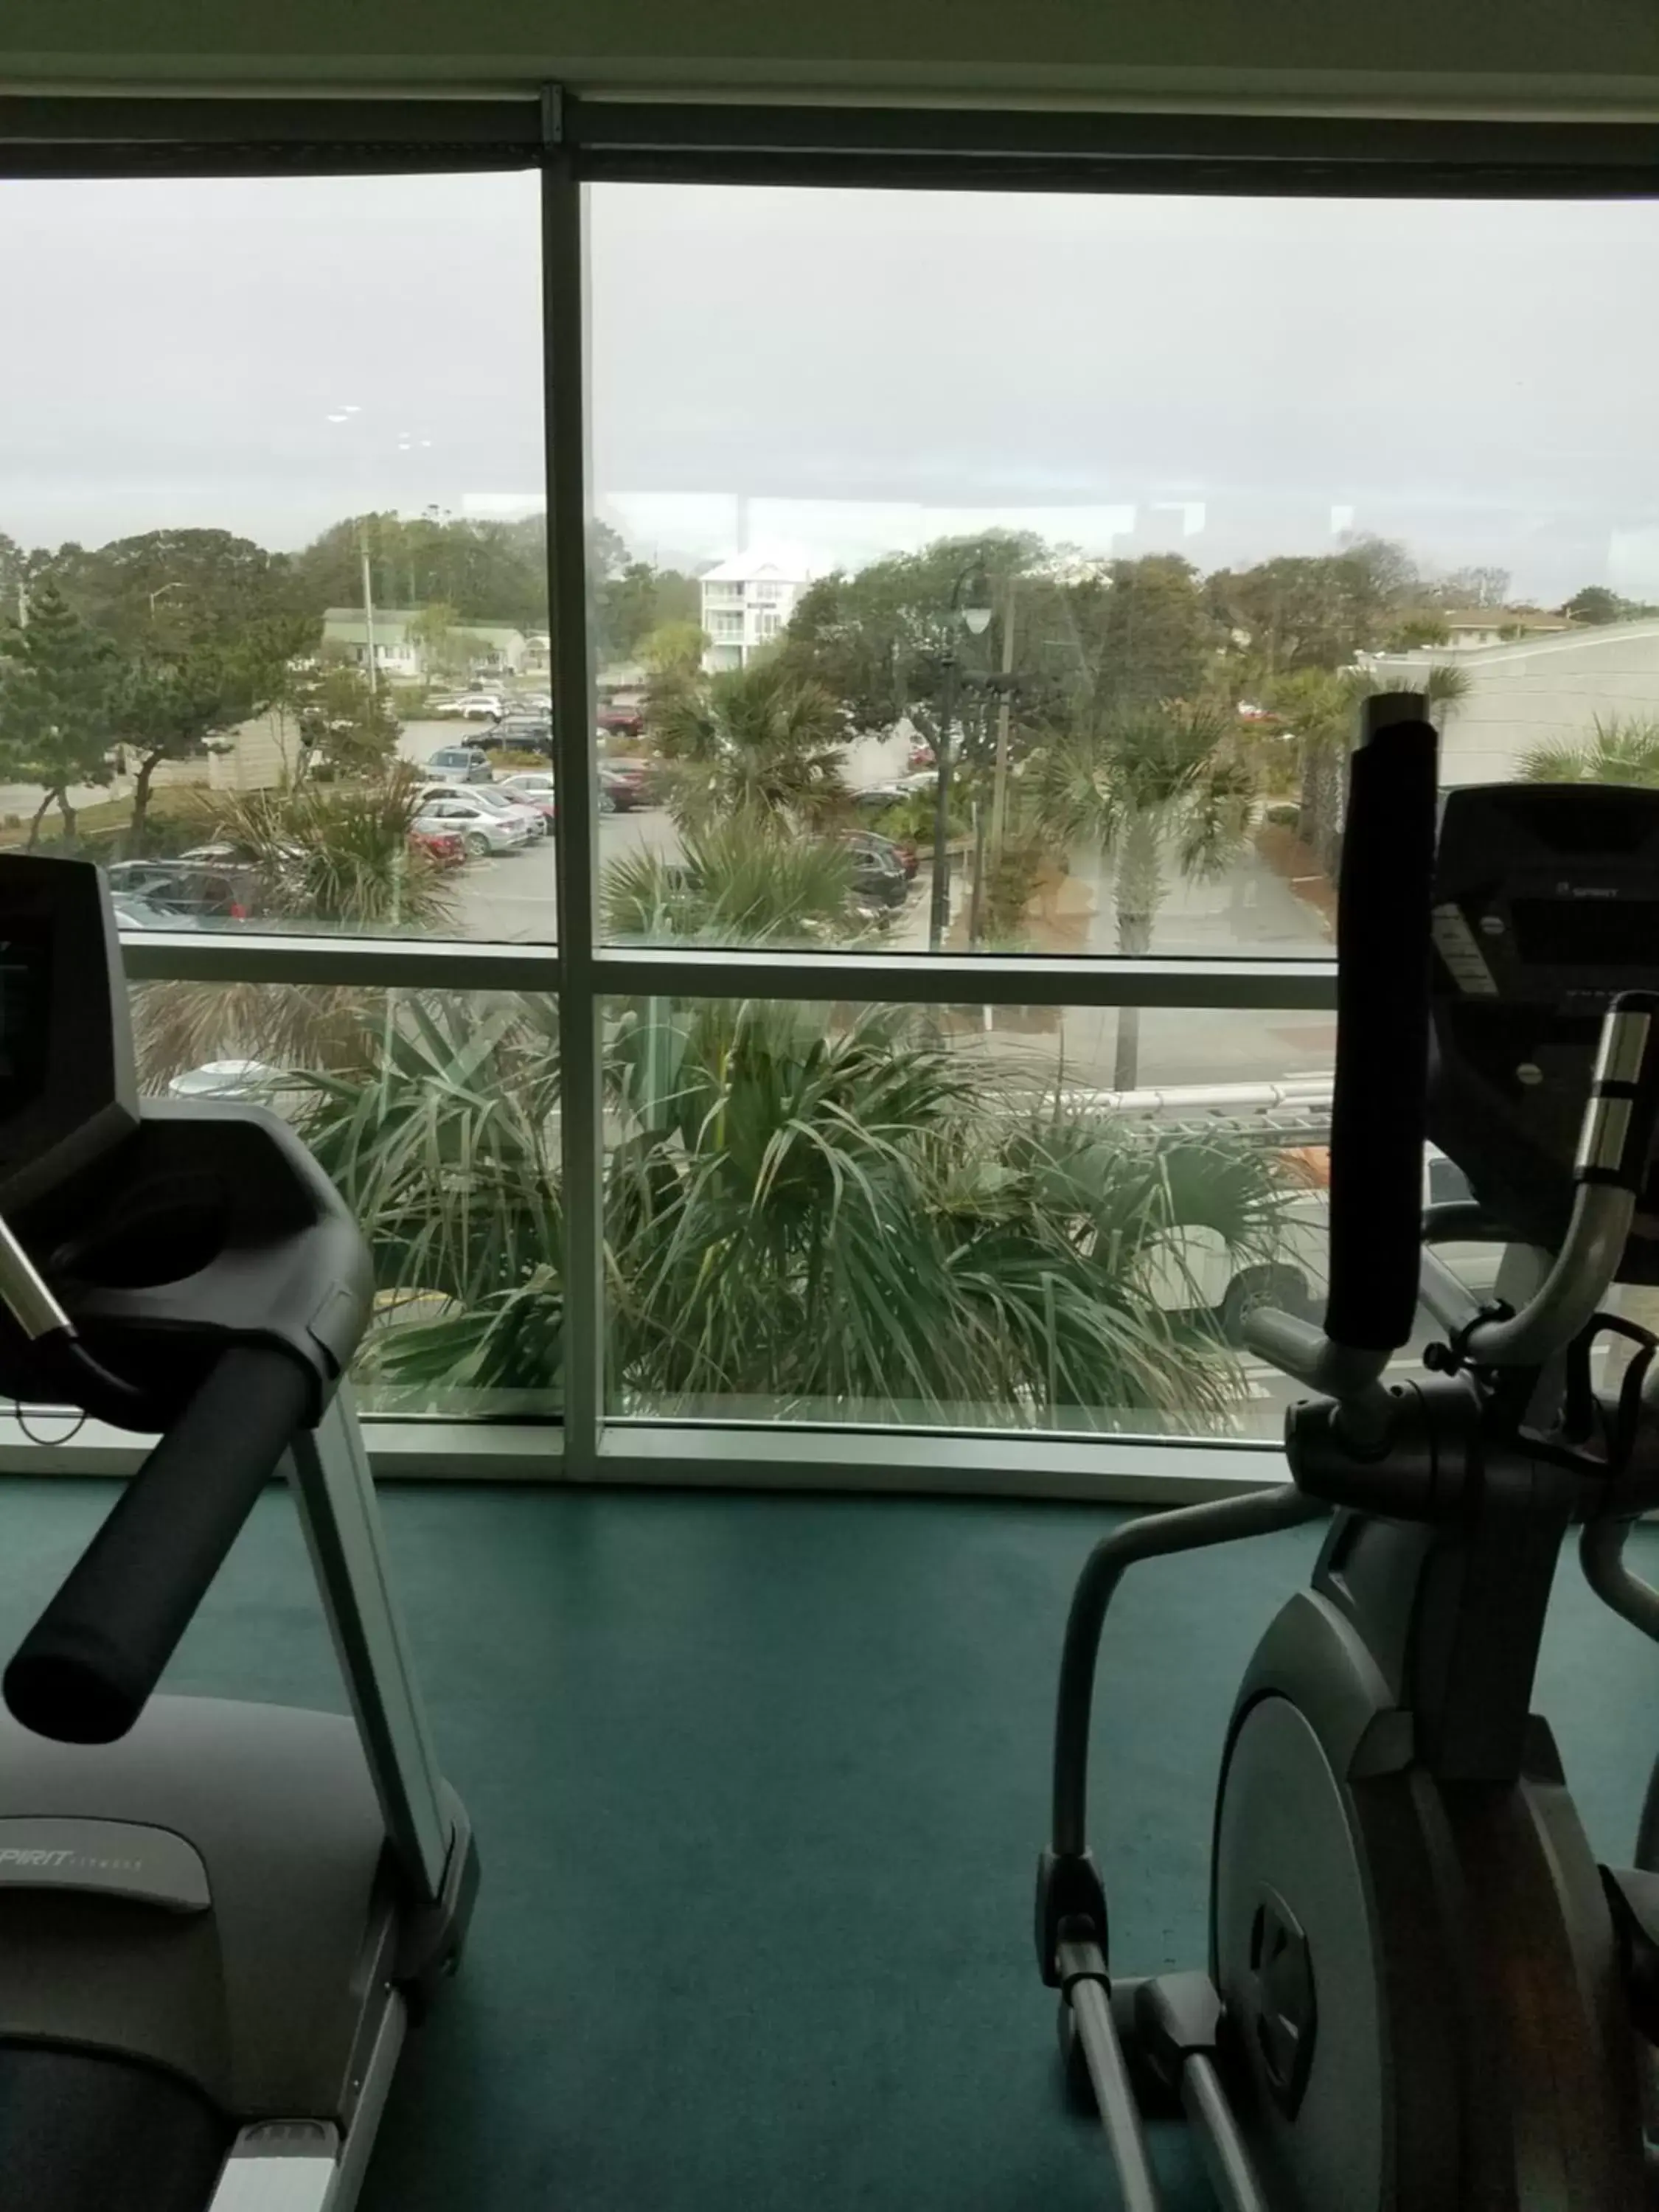 Fitness centre/facilities, Fitness Center/Facilities in Oceans One Resort